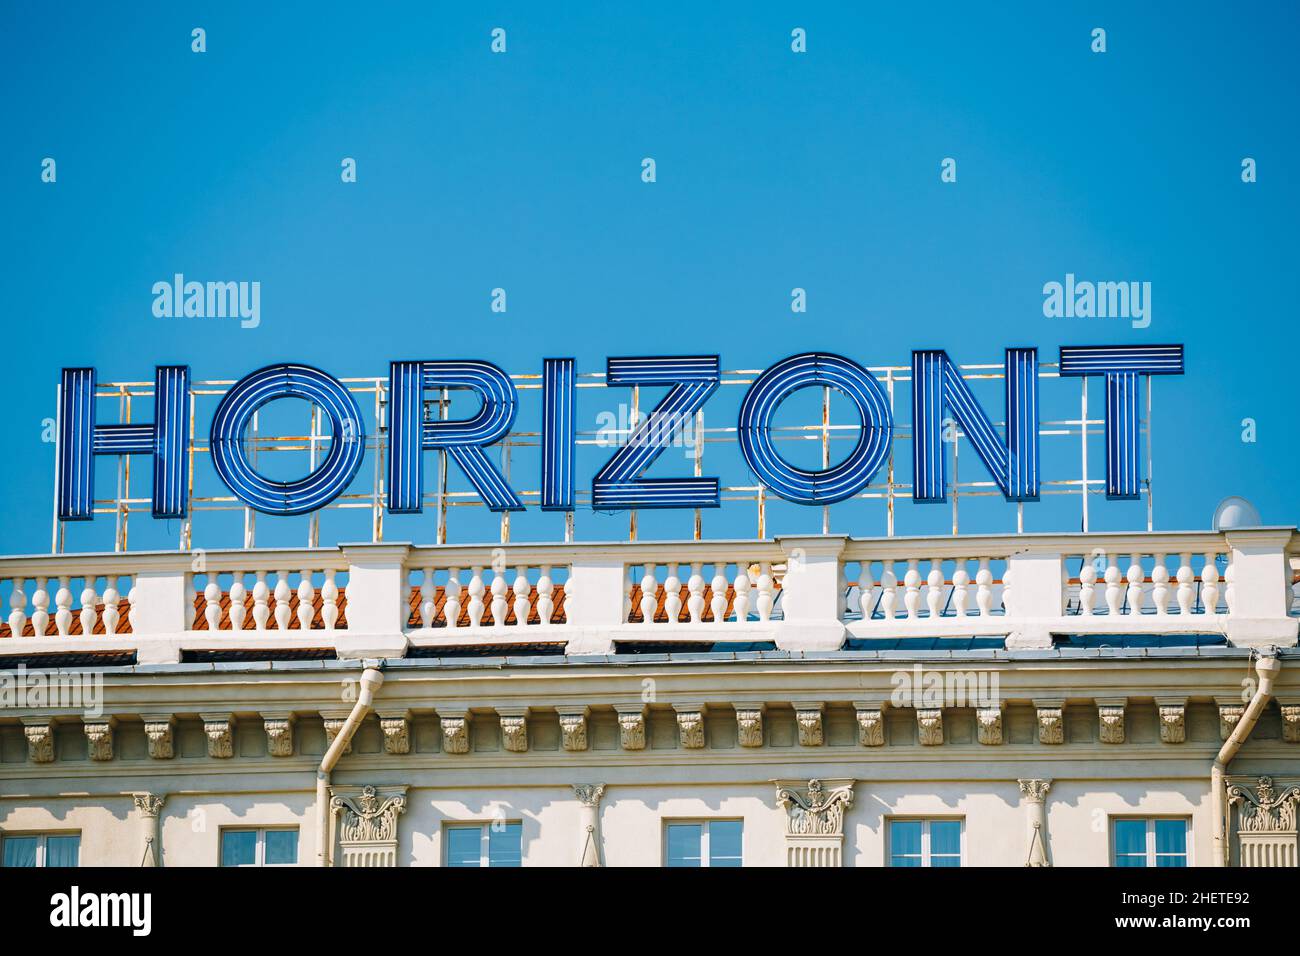 Logo of Holding 'Horizont' - Minsk plant, the largest in Belarus manufacturer of consumer electronics and home appliances. Stock Photo